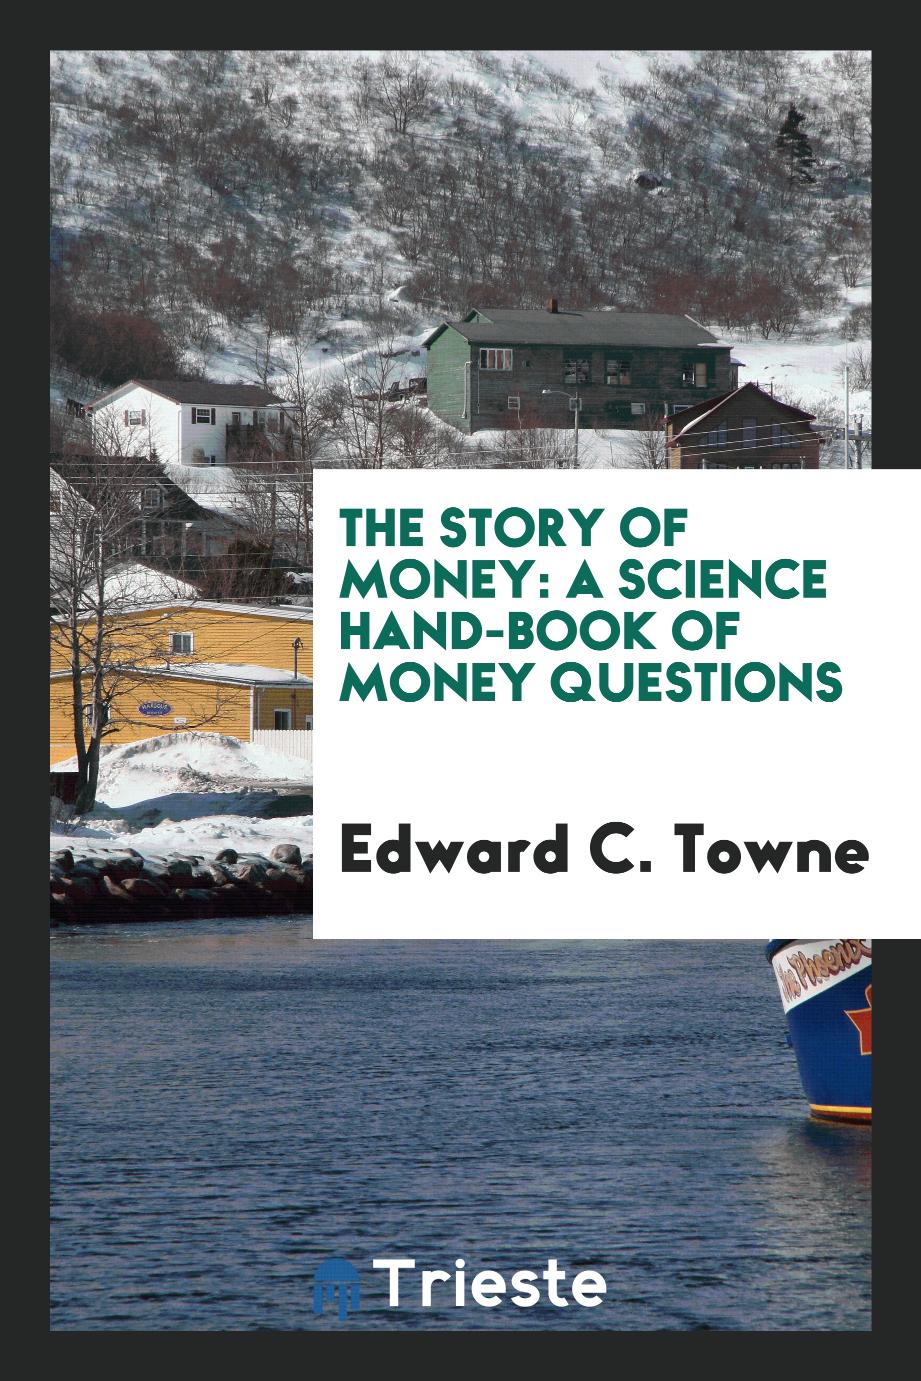 Edward C. Towne - The Story of Money: A Science Hand-Book of Money Questions